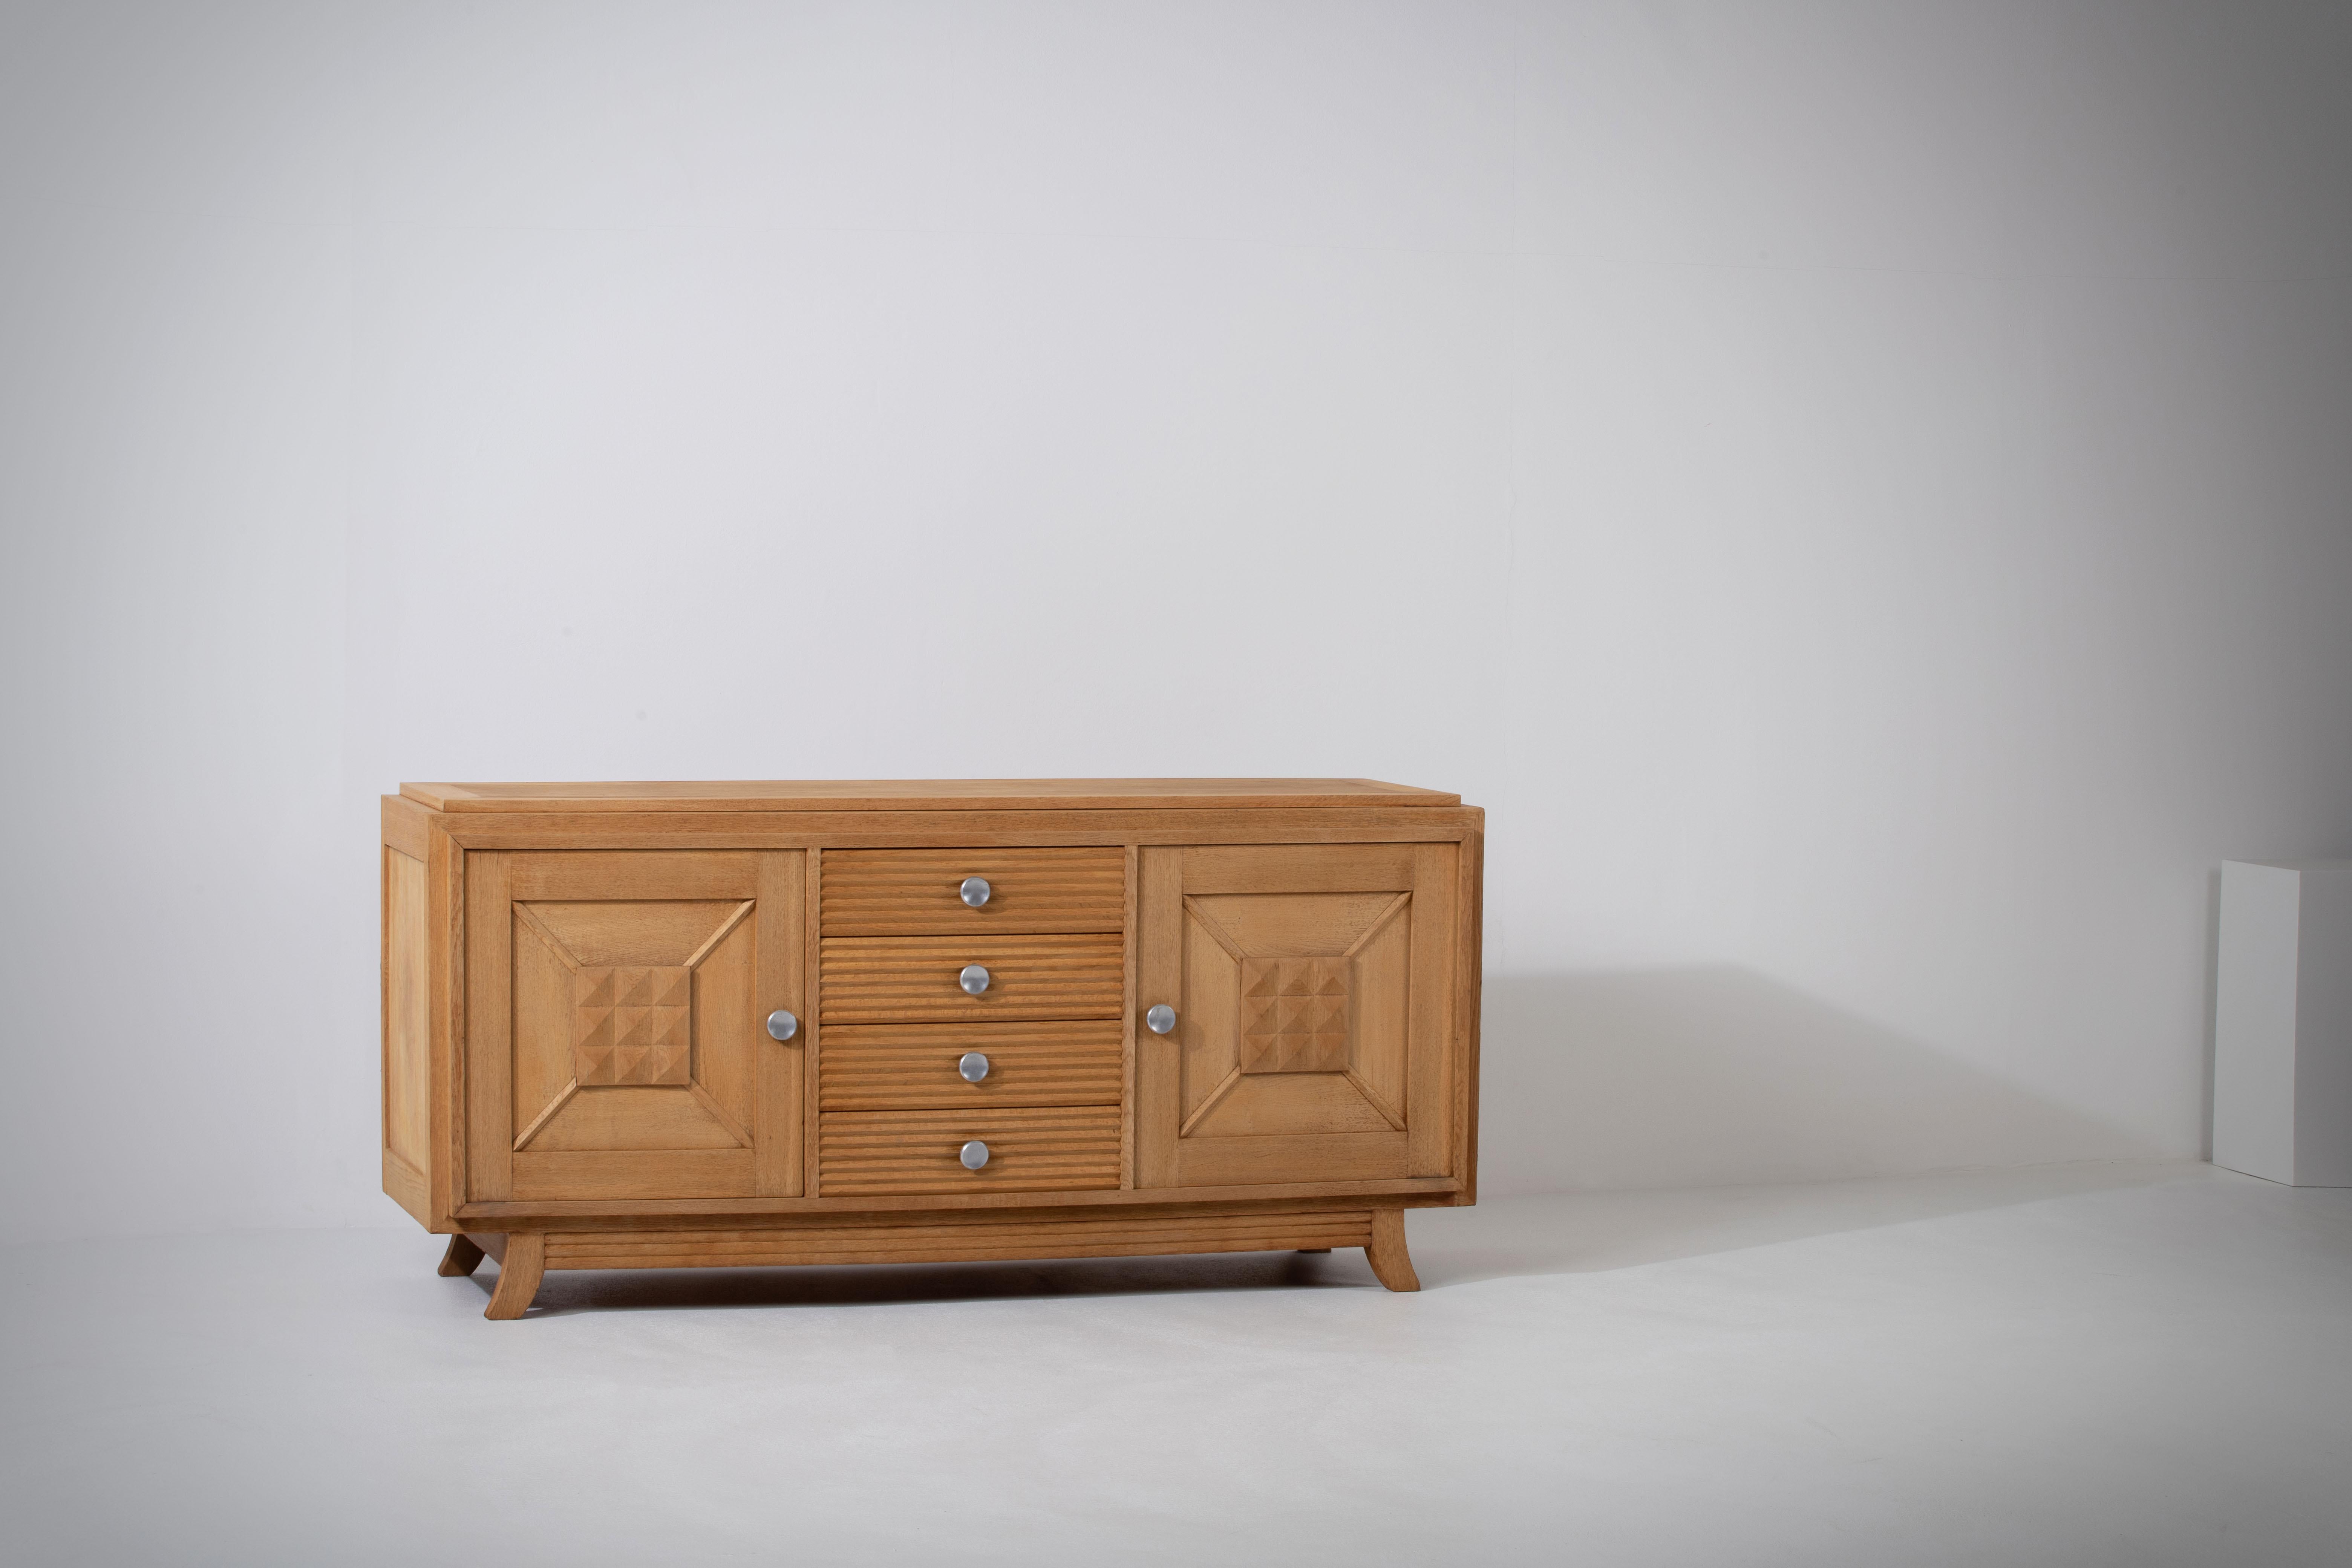 Introducing a captivating and refined 1940s Art Deco sideboard, exquisitely crafted in France from solid oak. This large and elegant credenza showcases the perfect fusion of Art Deco and Brutalist influences, making it a truly remarkable